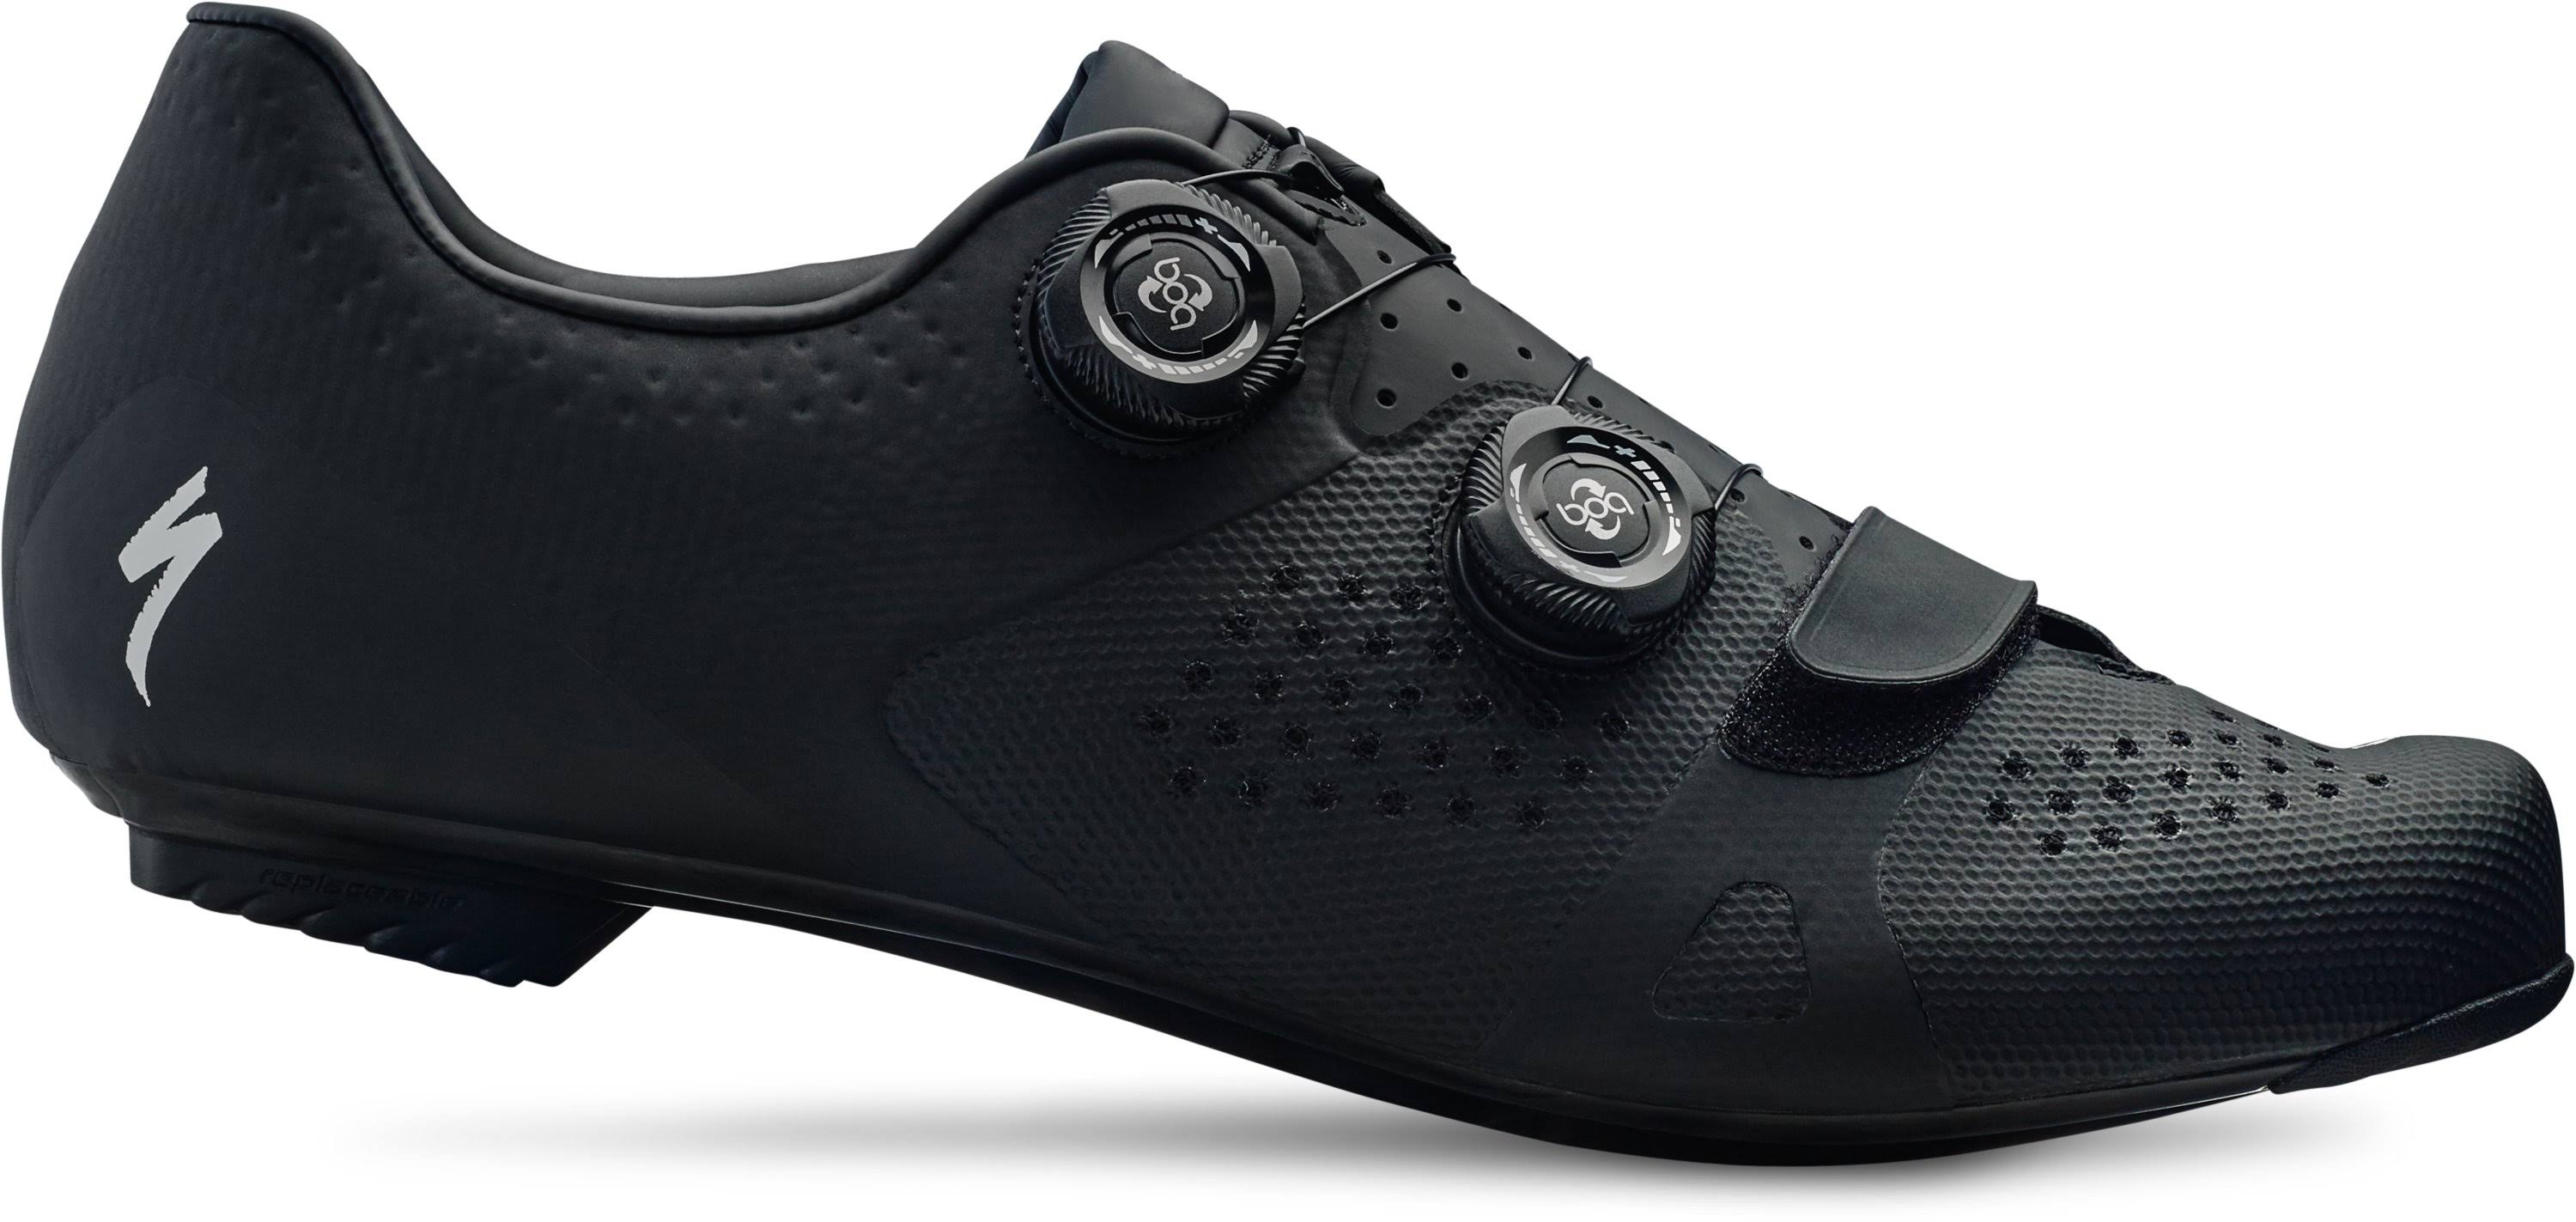 Specialized Torch 3.0 Road Shoe Black / 46.5